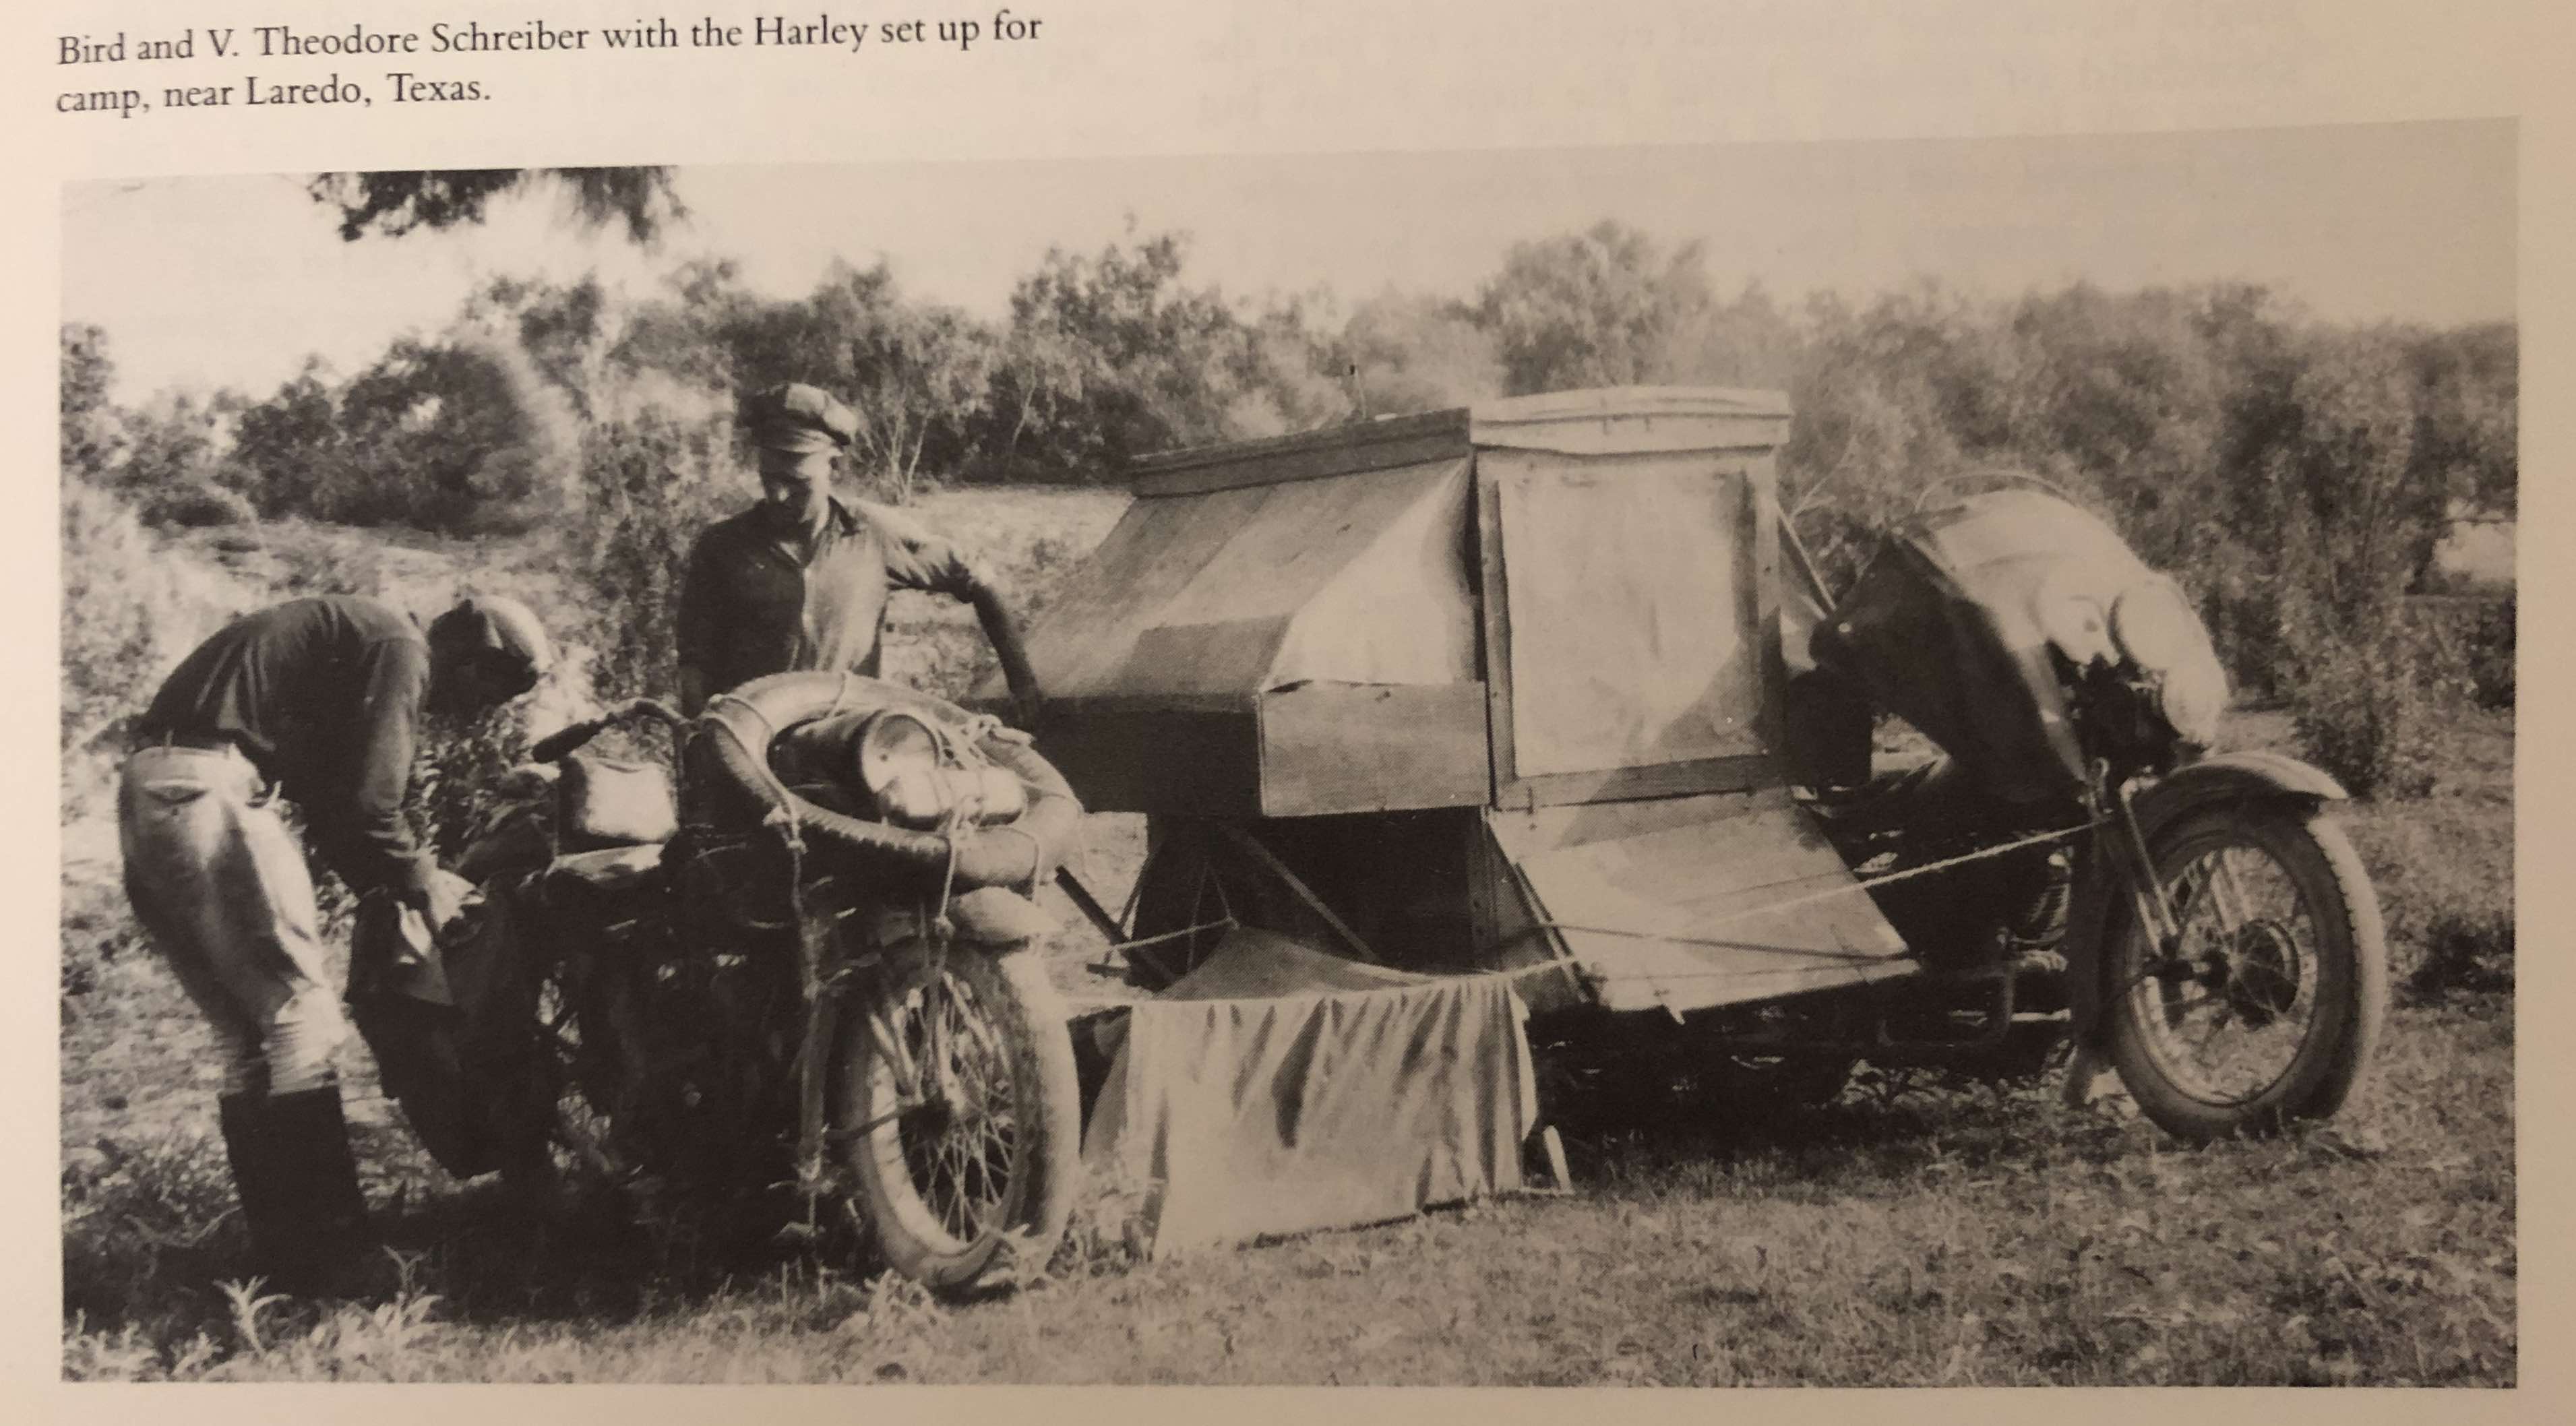 Black and white photo of two men. A canvas tent and a clothesline with a sheet hanging from it is stretched between two motorcycles which are absolutely loaded down with stuff, including several saddle bags and at least one spare tire. One of the men is fiddling with the motorcycle on the left. It's not clear to me which person is Bird.  